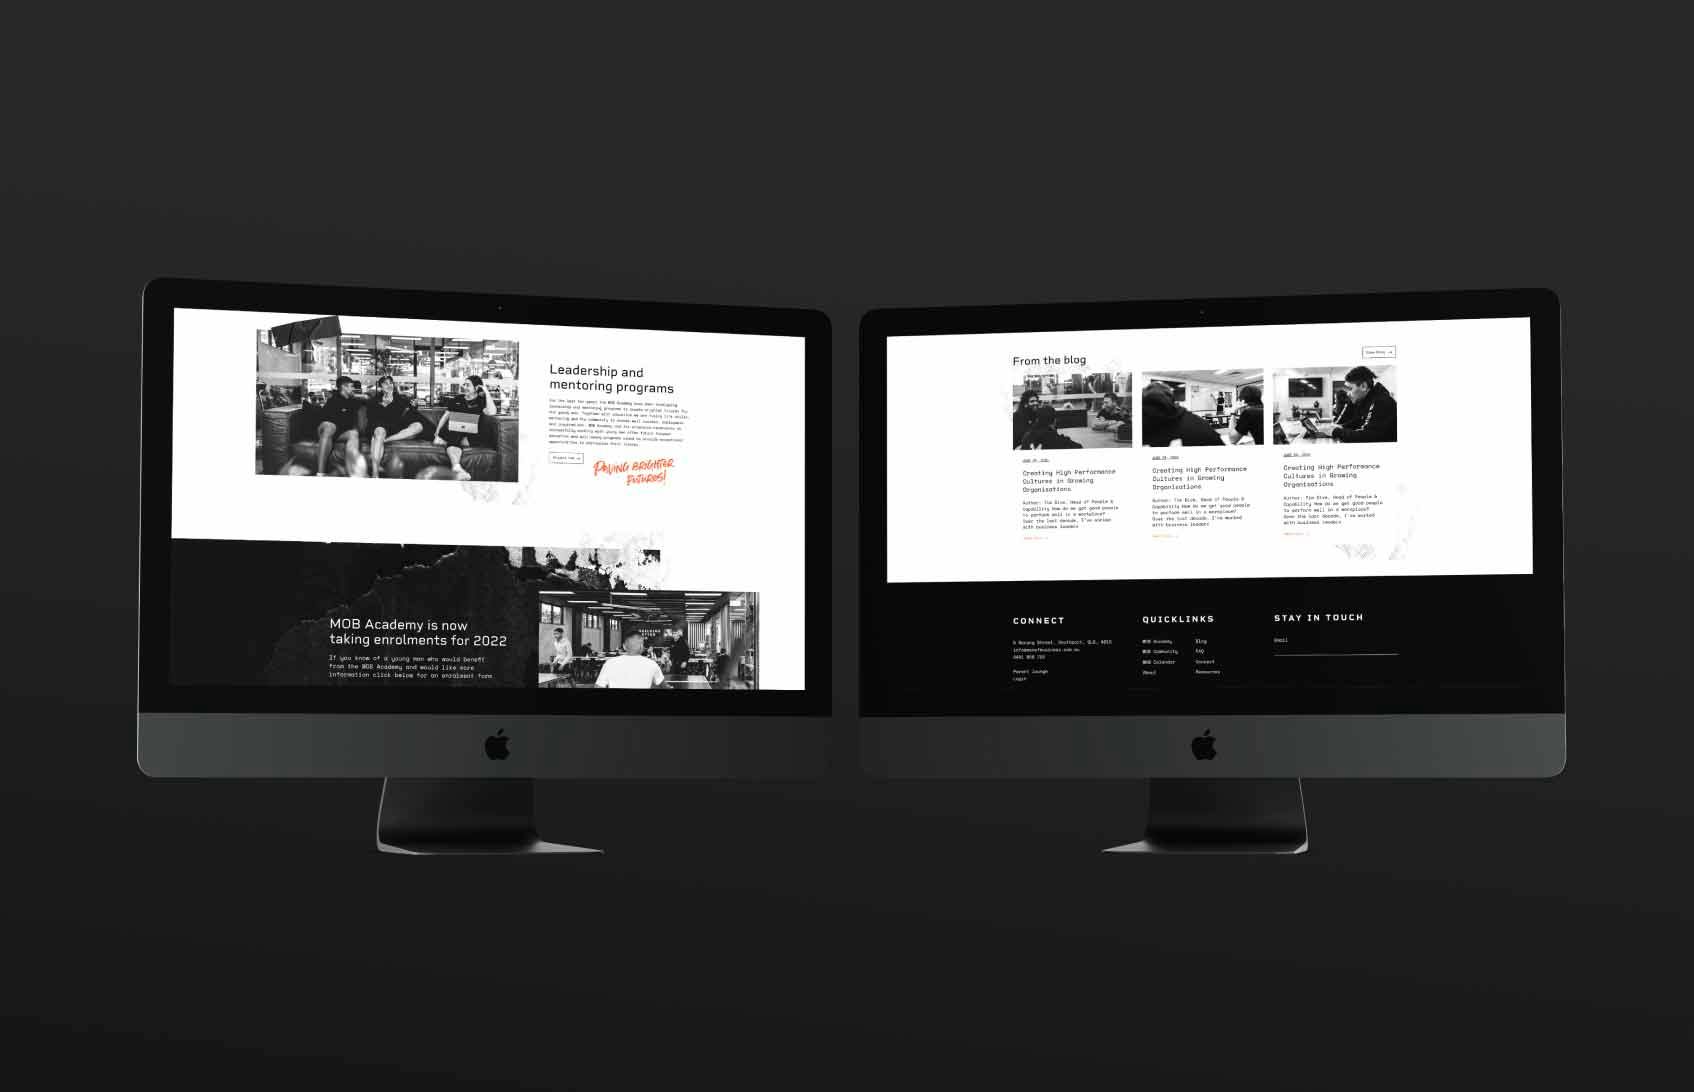 Men of Business Academy website displayed on two computer screens